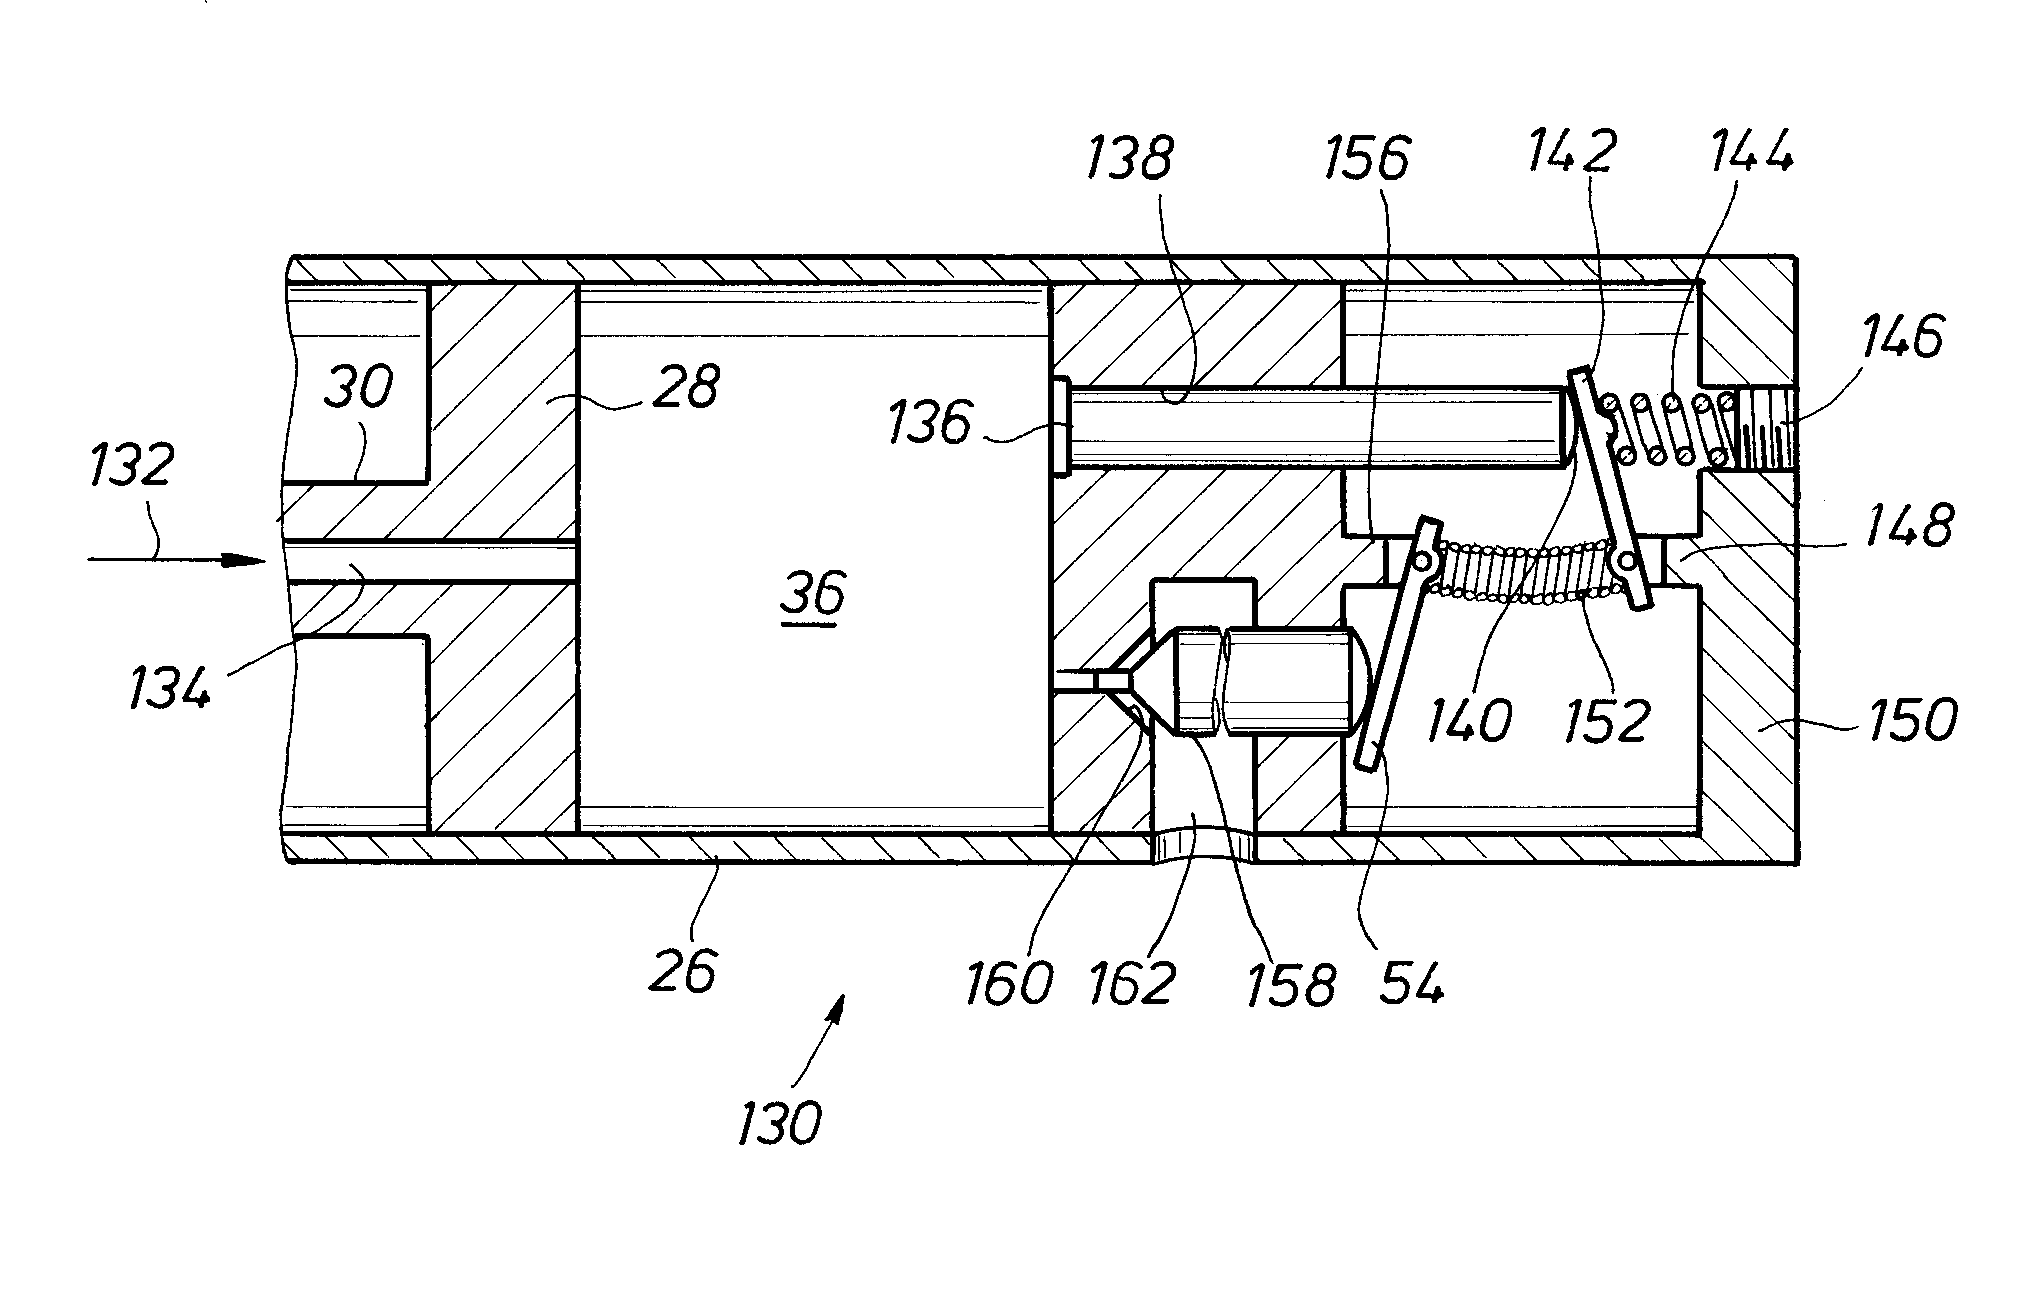 Hydraulic oscillator for use in a transmitter valve